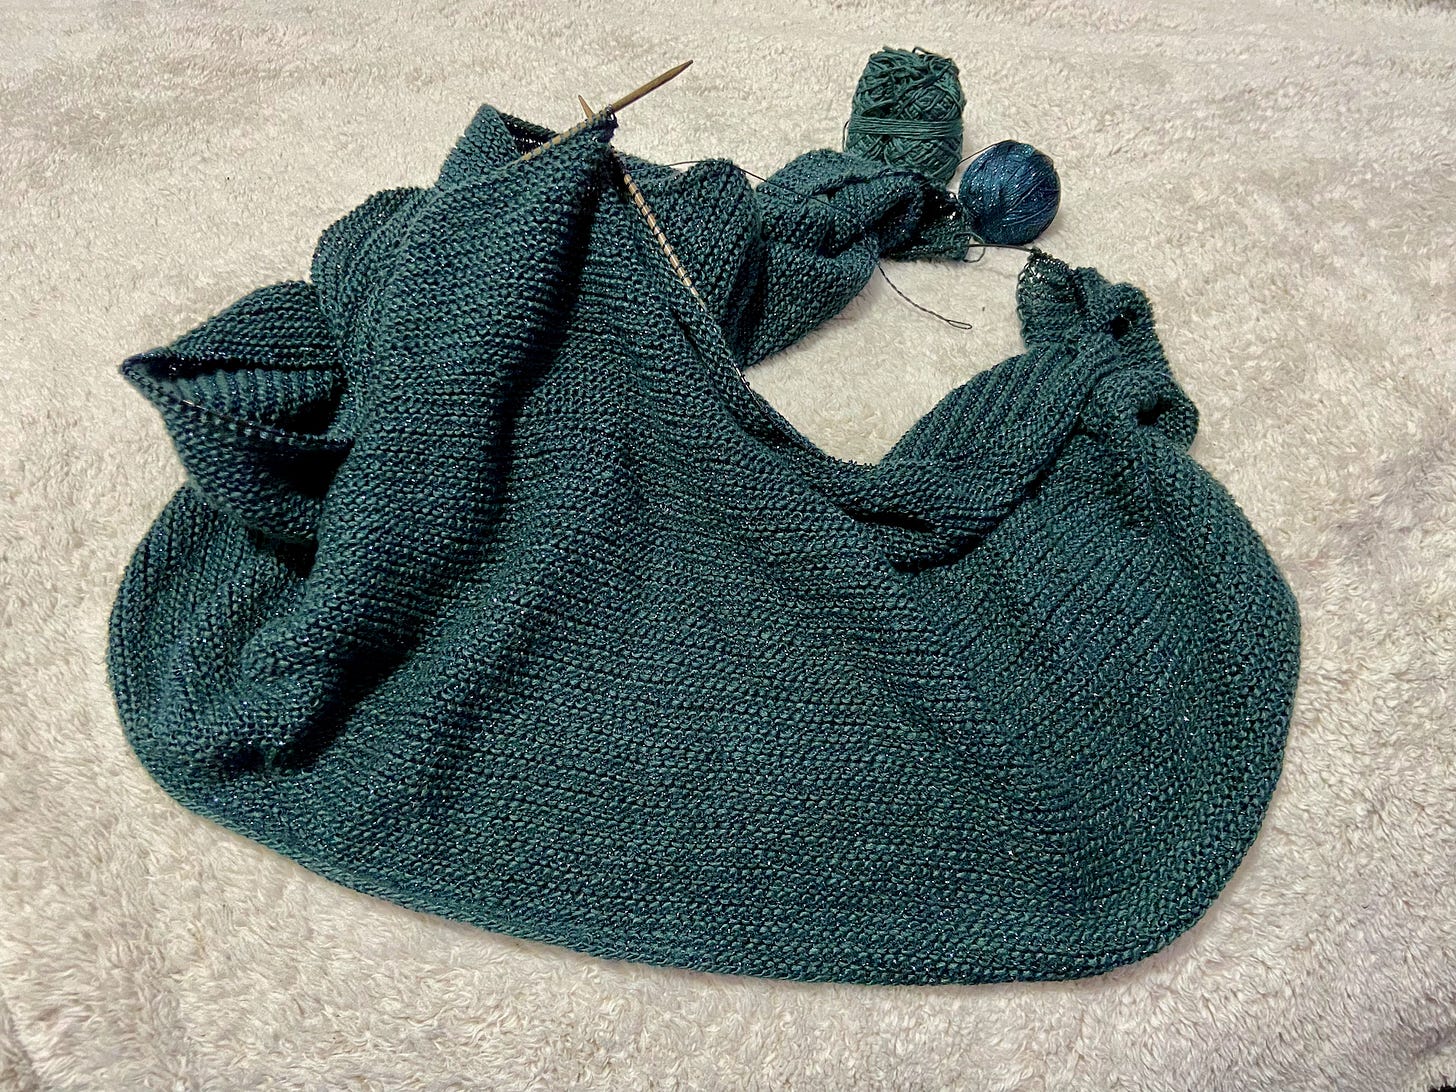 An in-progress Mineral Wrap, made with two different shades of blue yarn, attached to knitting needles. It's propped up and placed on an off-white throw blanket.